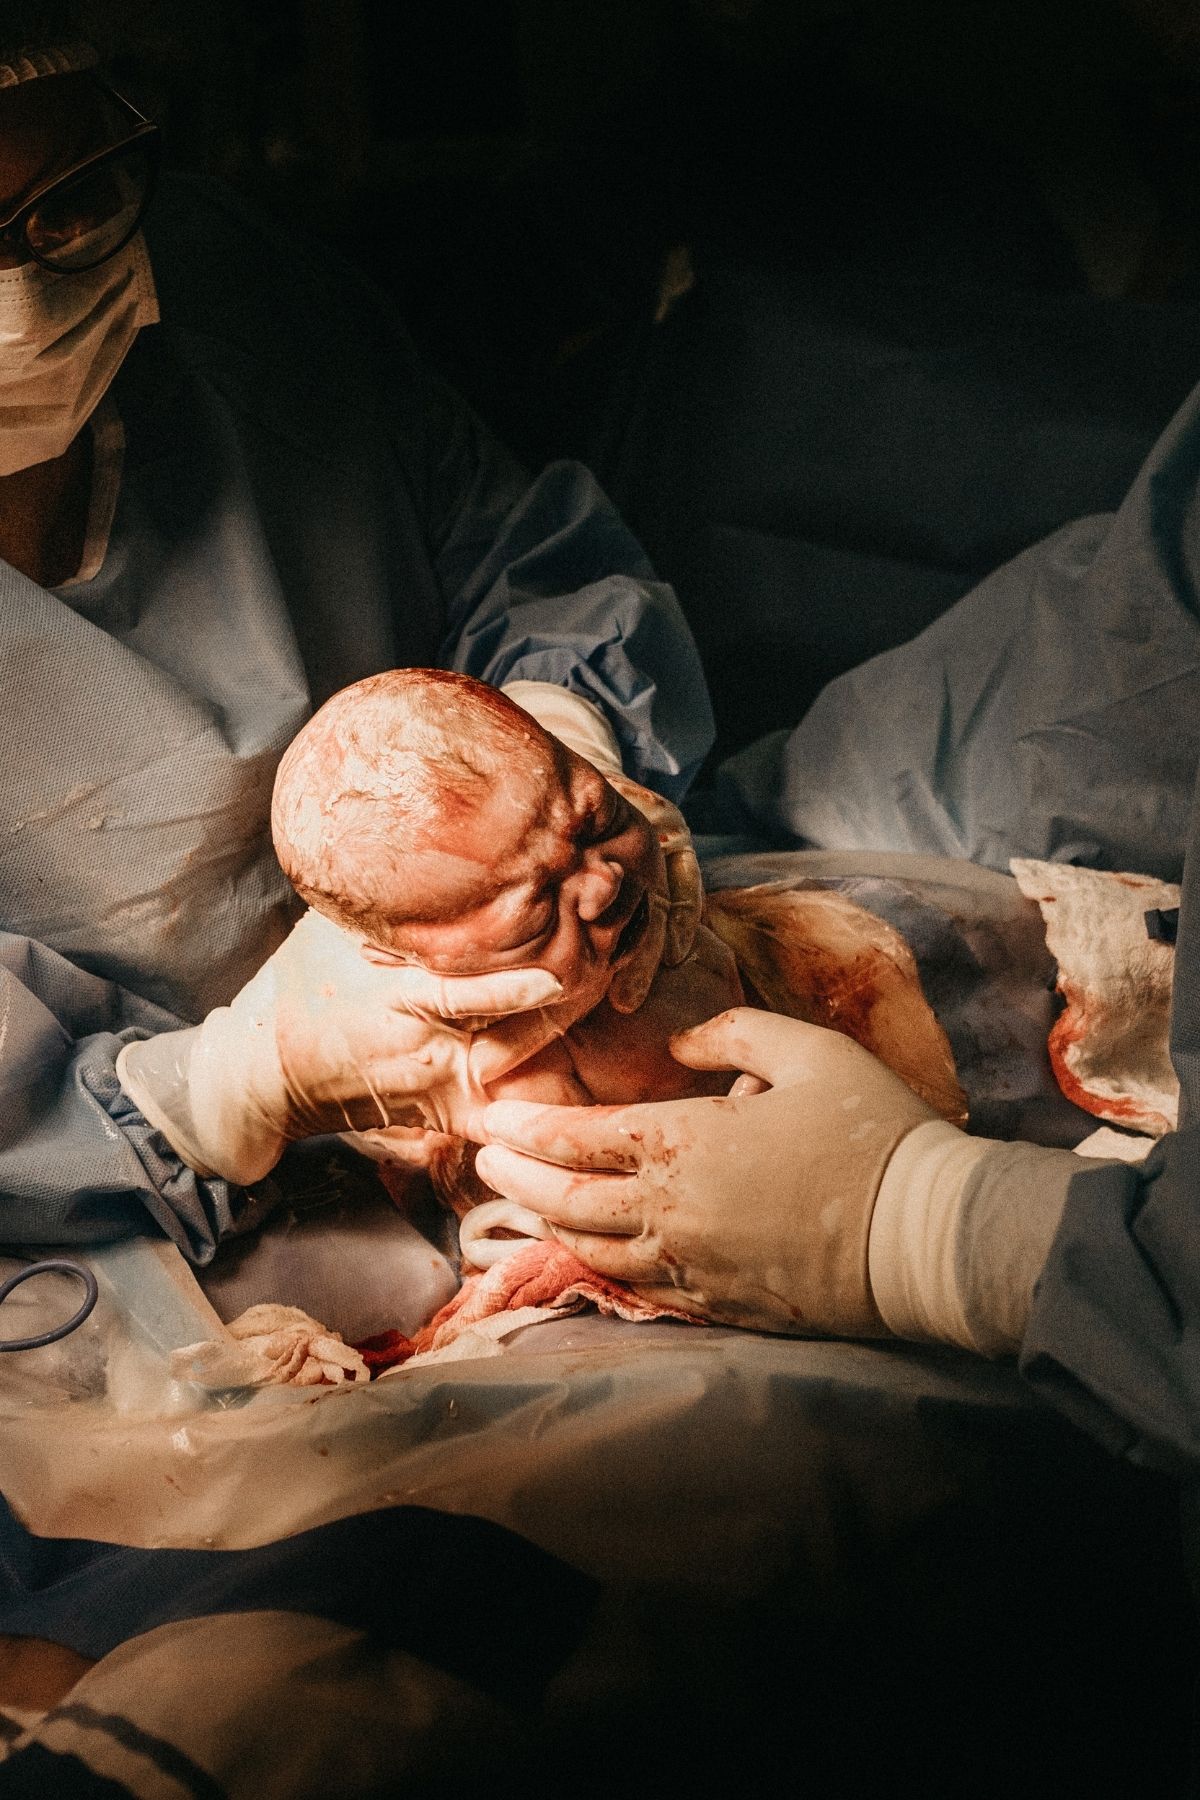 Nurses pull a newborn baby from its mothers womb during a c-section delivery.